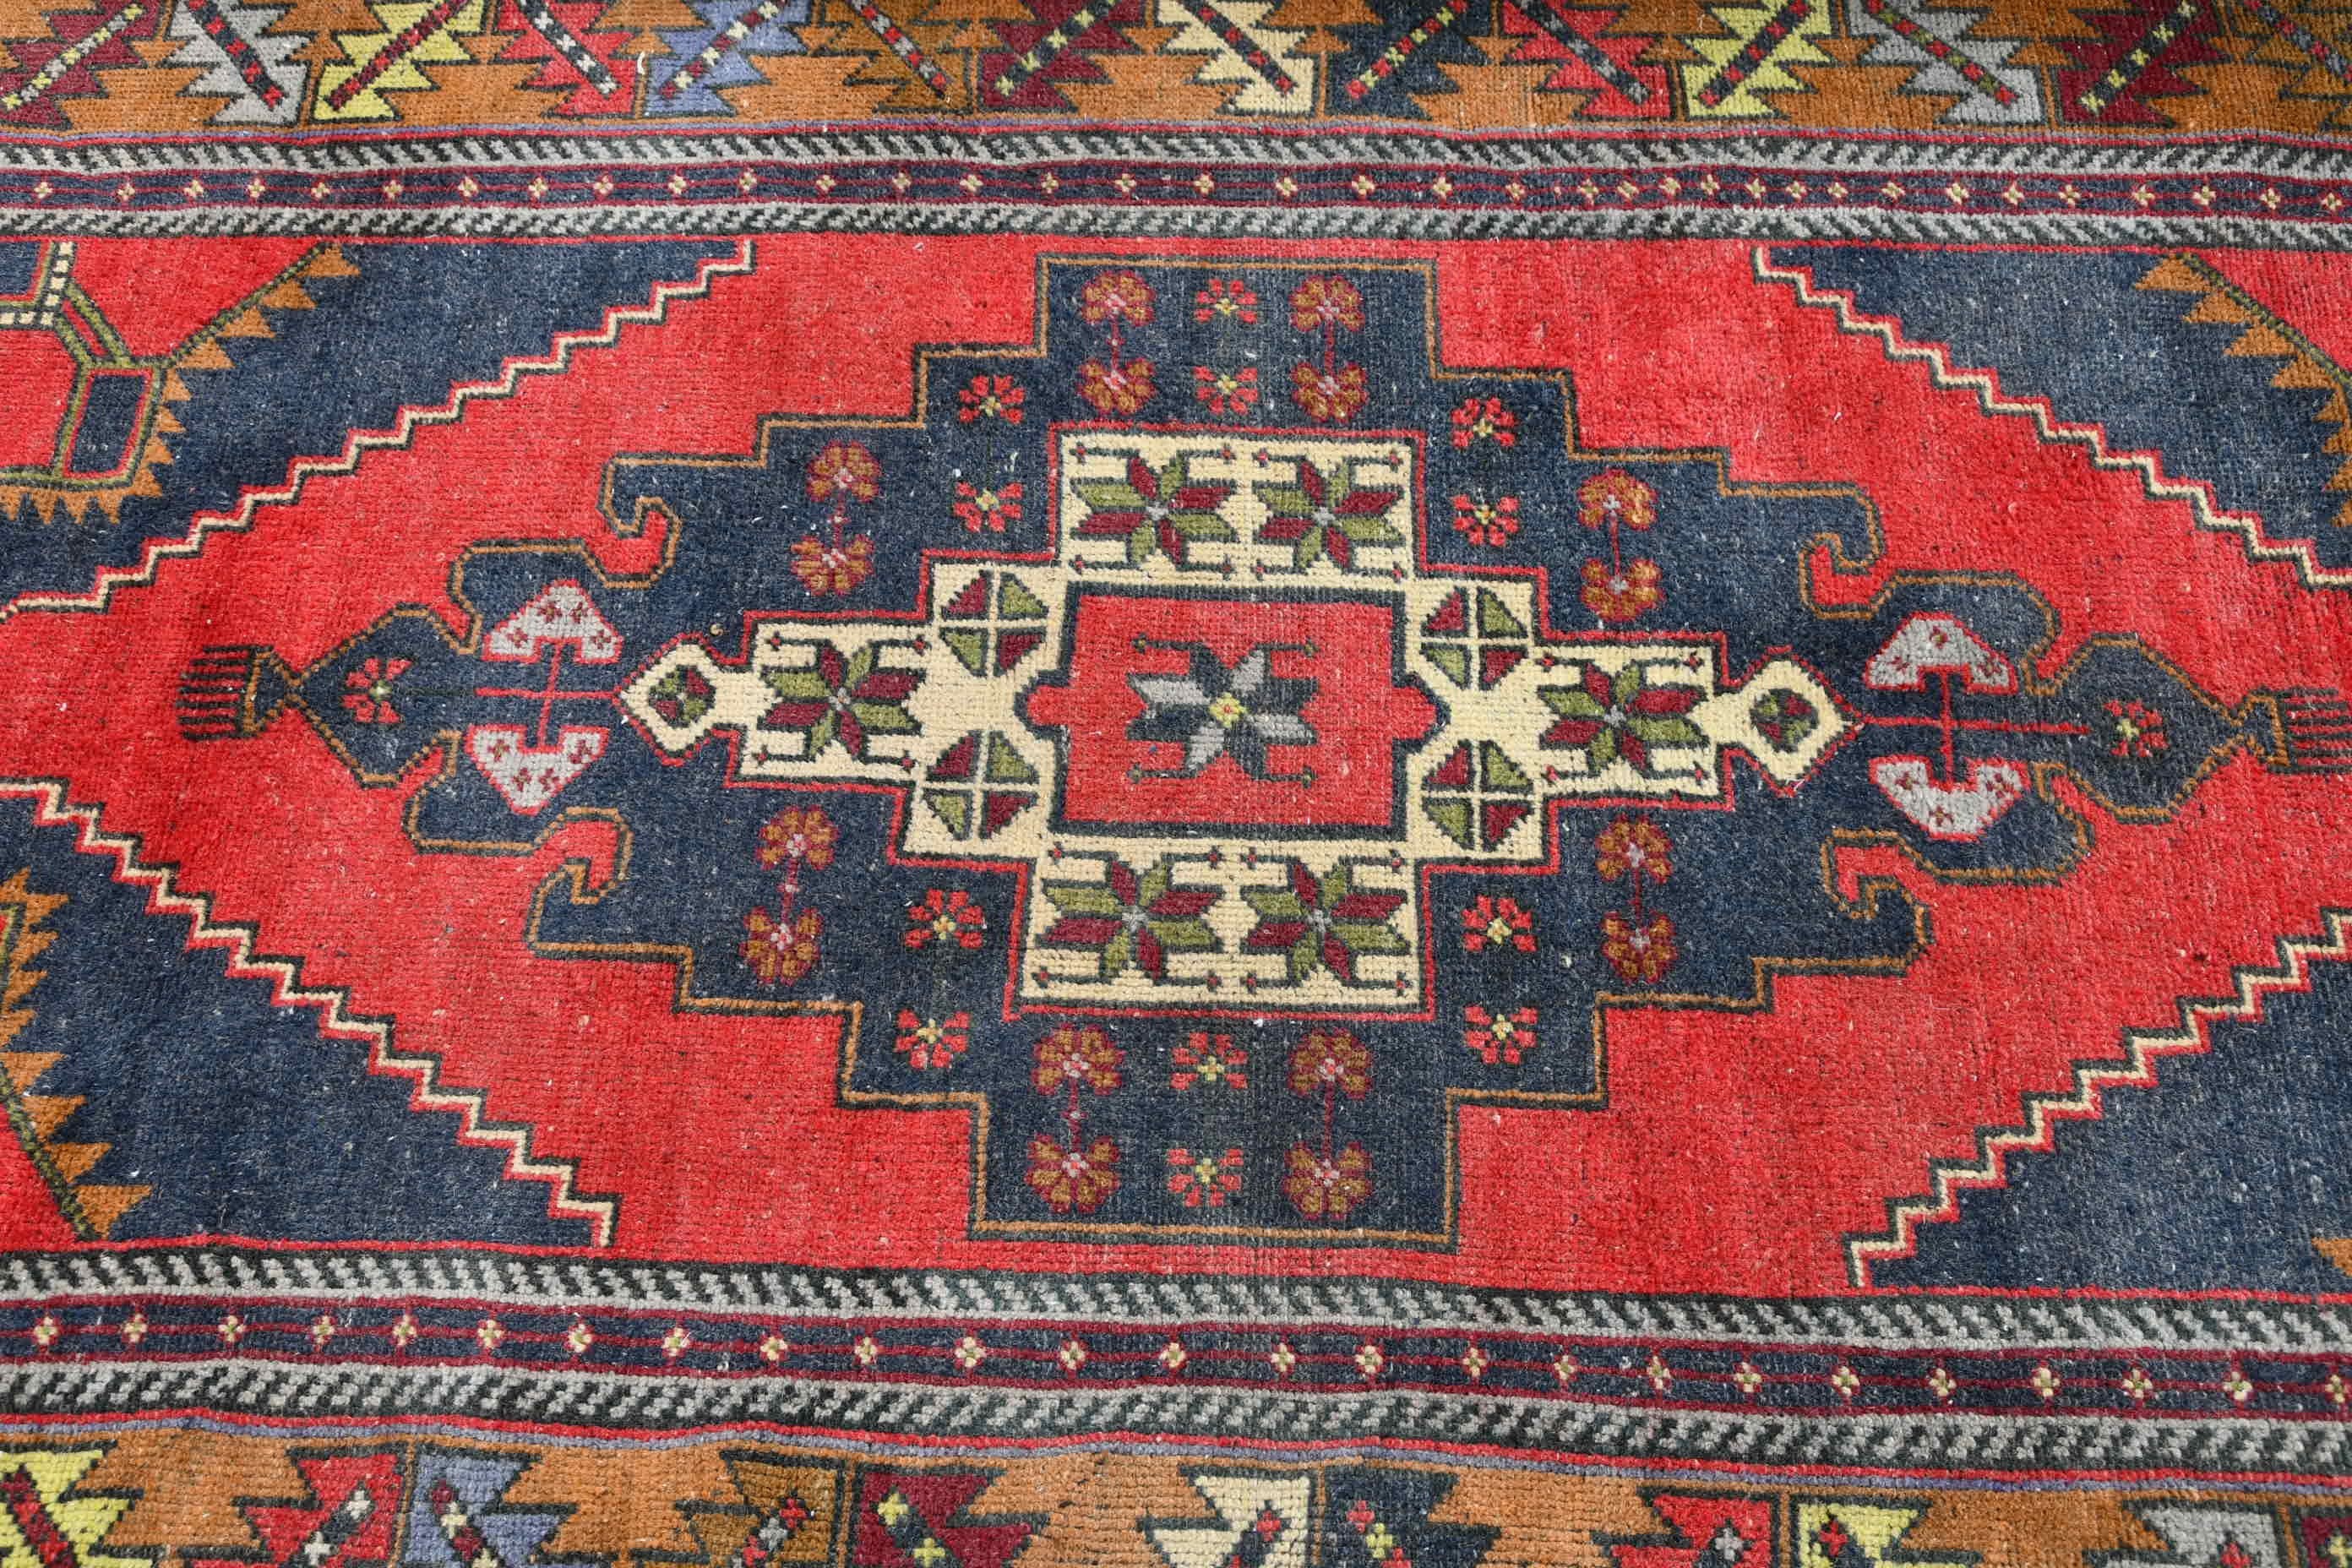 Anatolian Rugs, Cute Rugs, 4.1x8.3 ft Area Rugs, Antique Rug, Turkish Rugs, Vintage Rugs, Nursery Rugs, Kitchen Rug, Red Antique Rugs